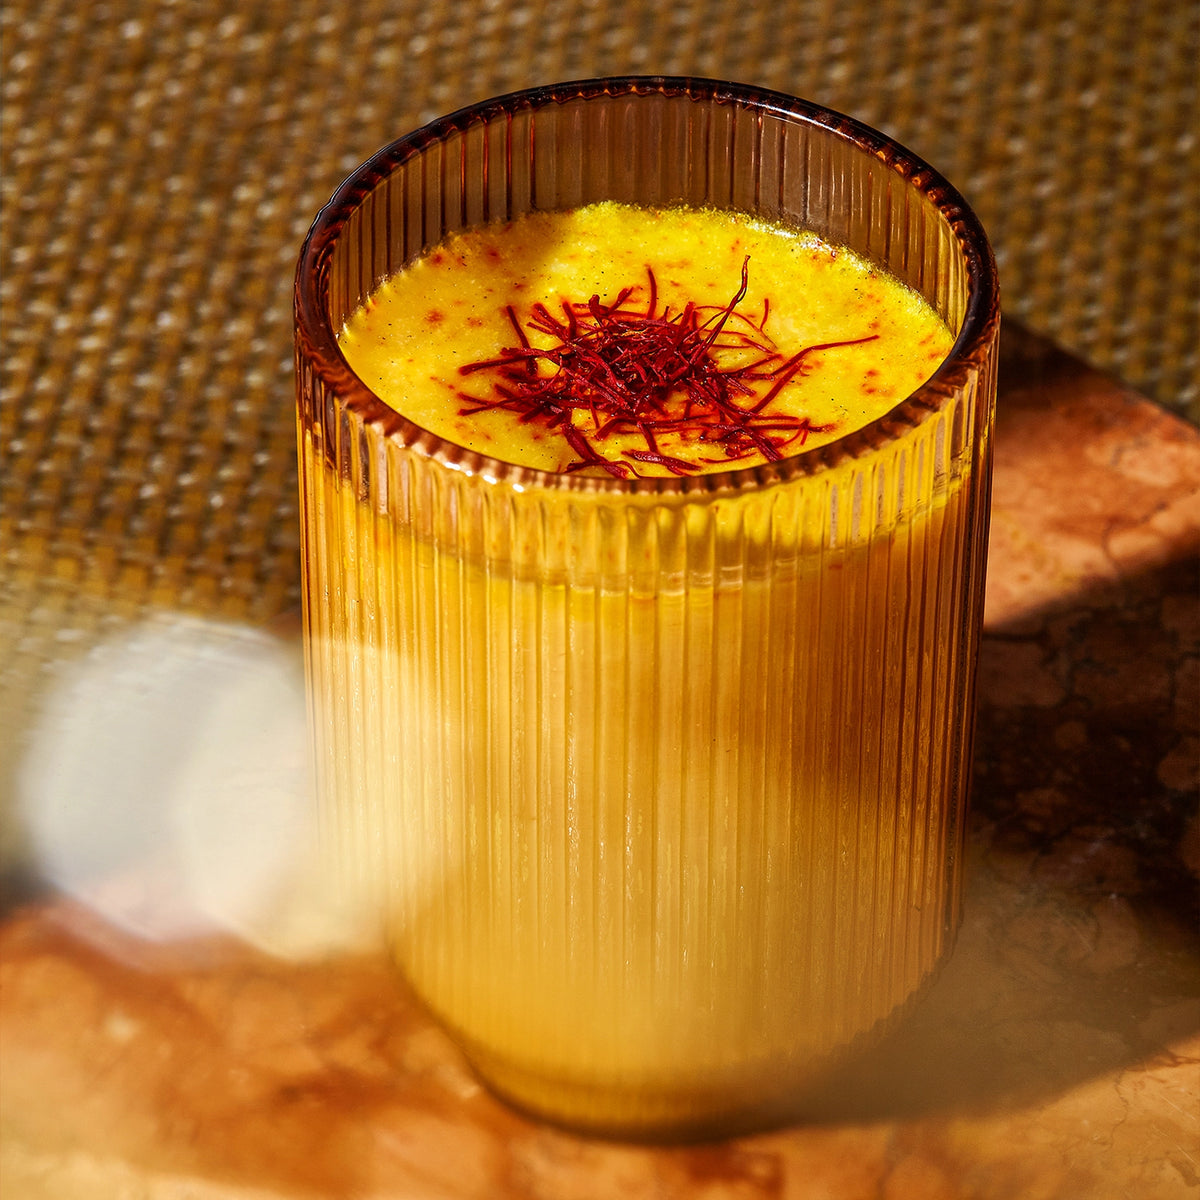 A glass of golden saffron-infused latte on a textured surface by THE FULLEST.